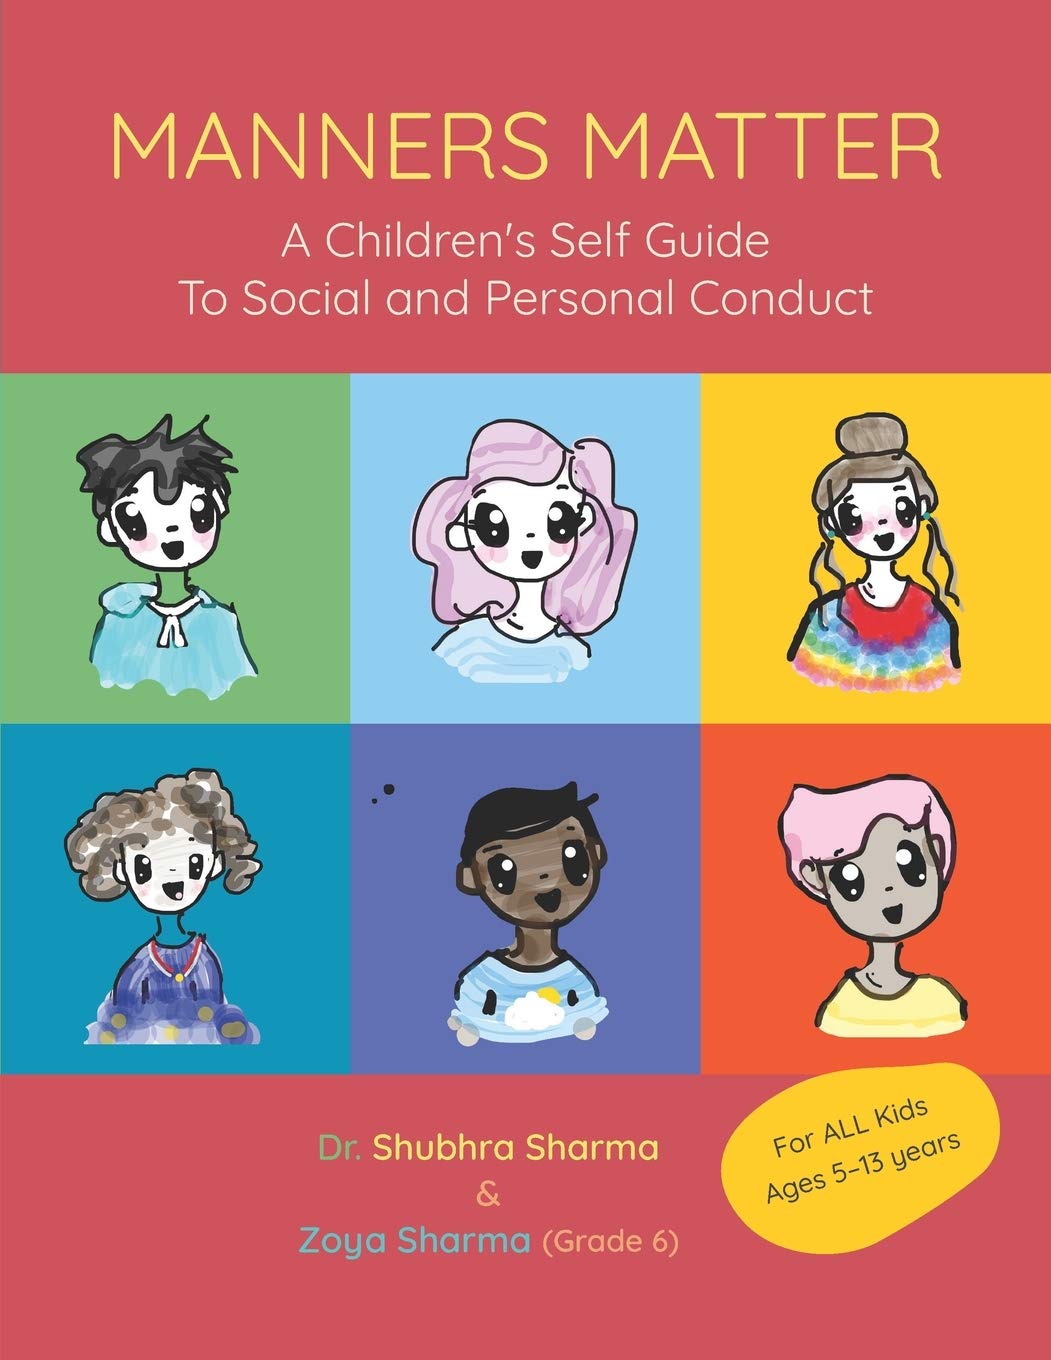 Manners Matter: A Children’s Self-Guide to Social and Personal Conduct.